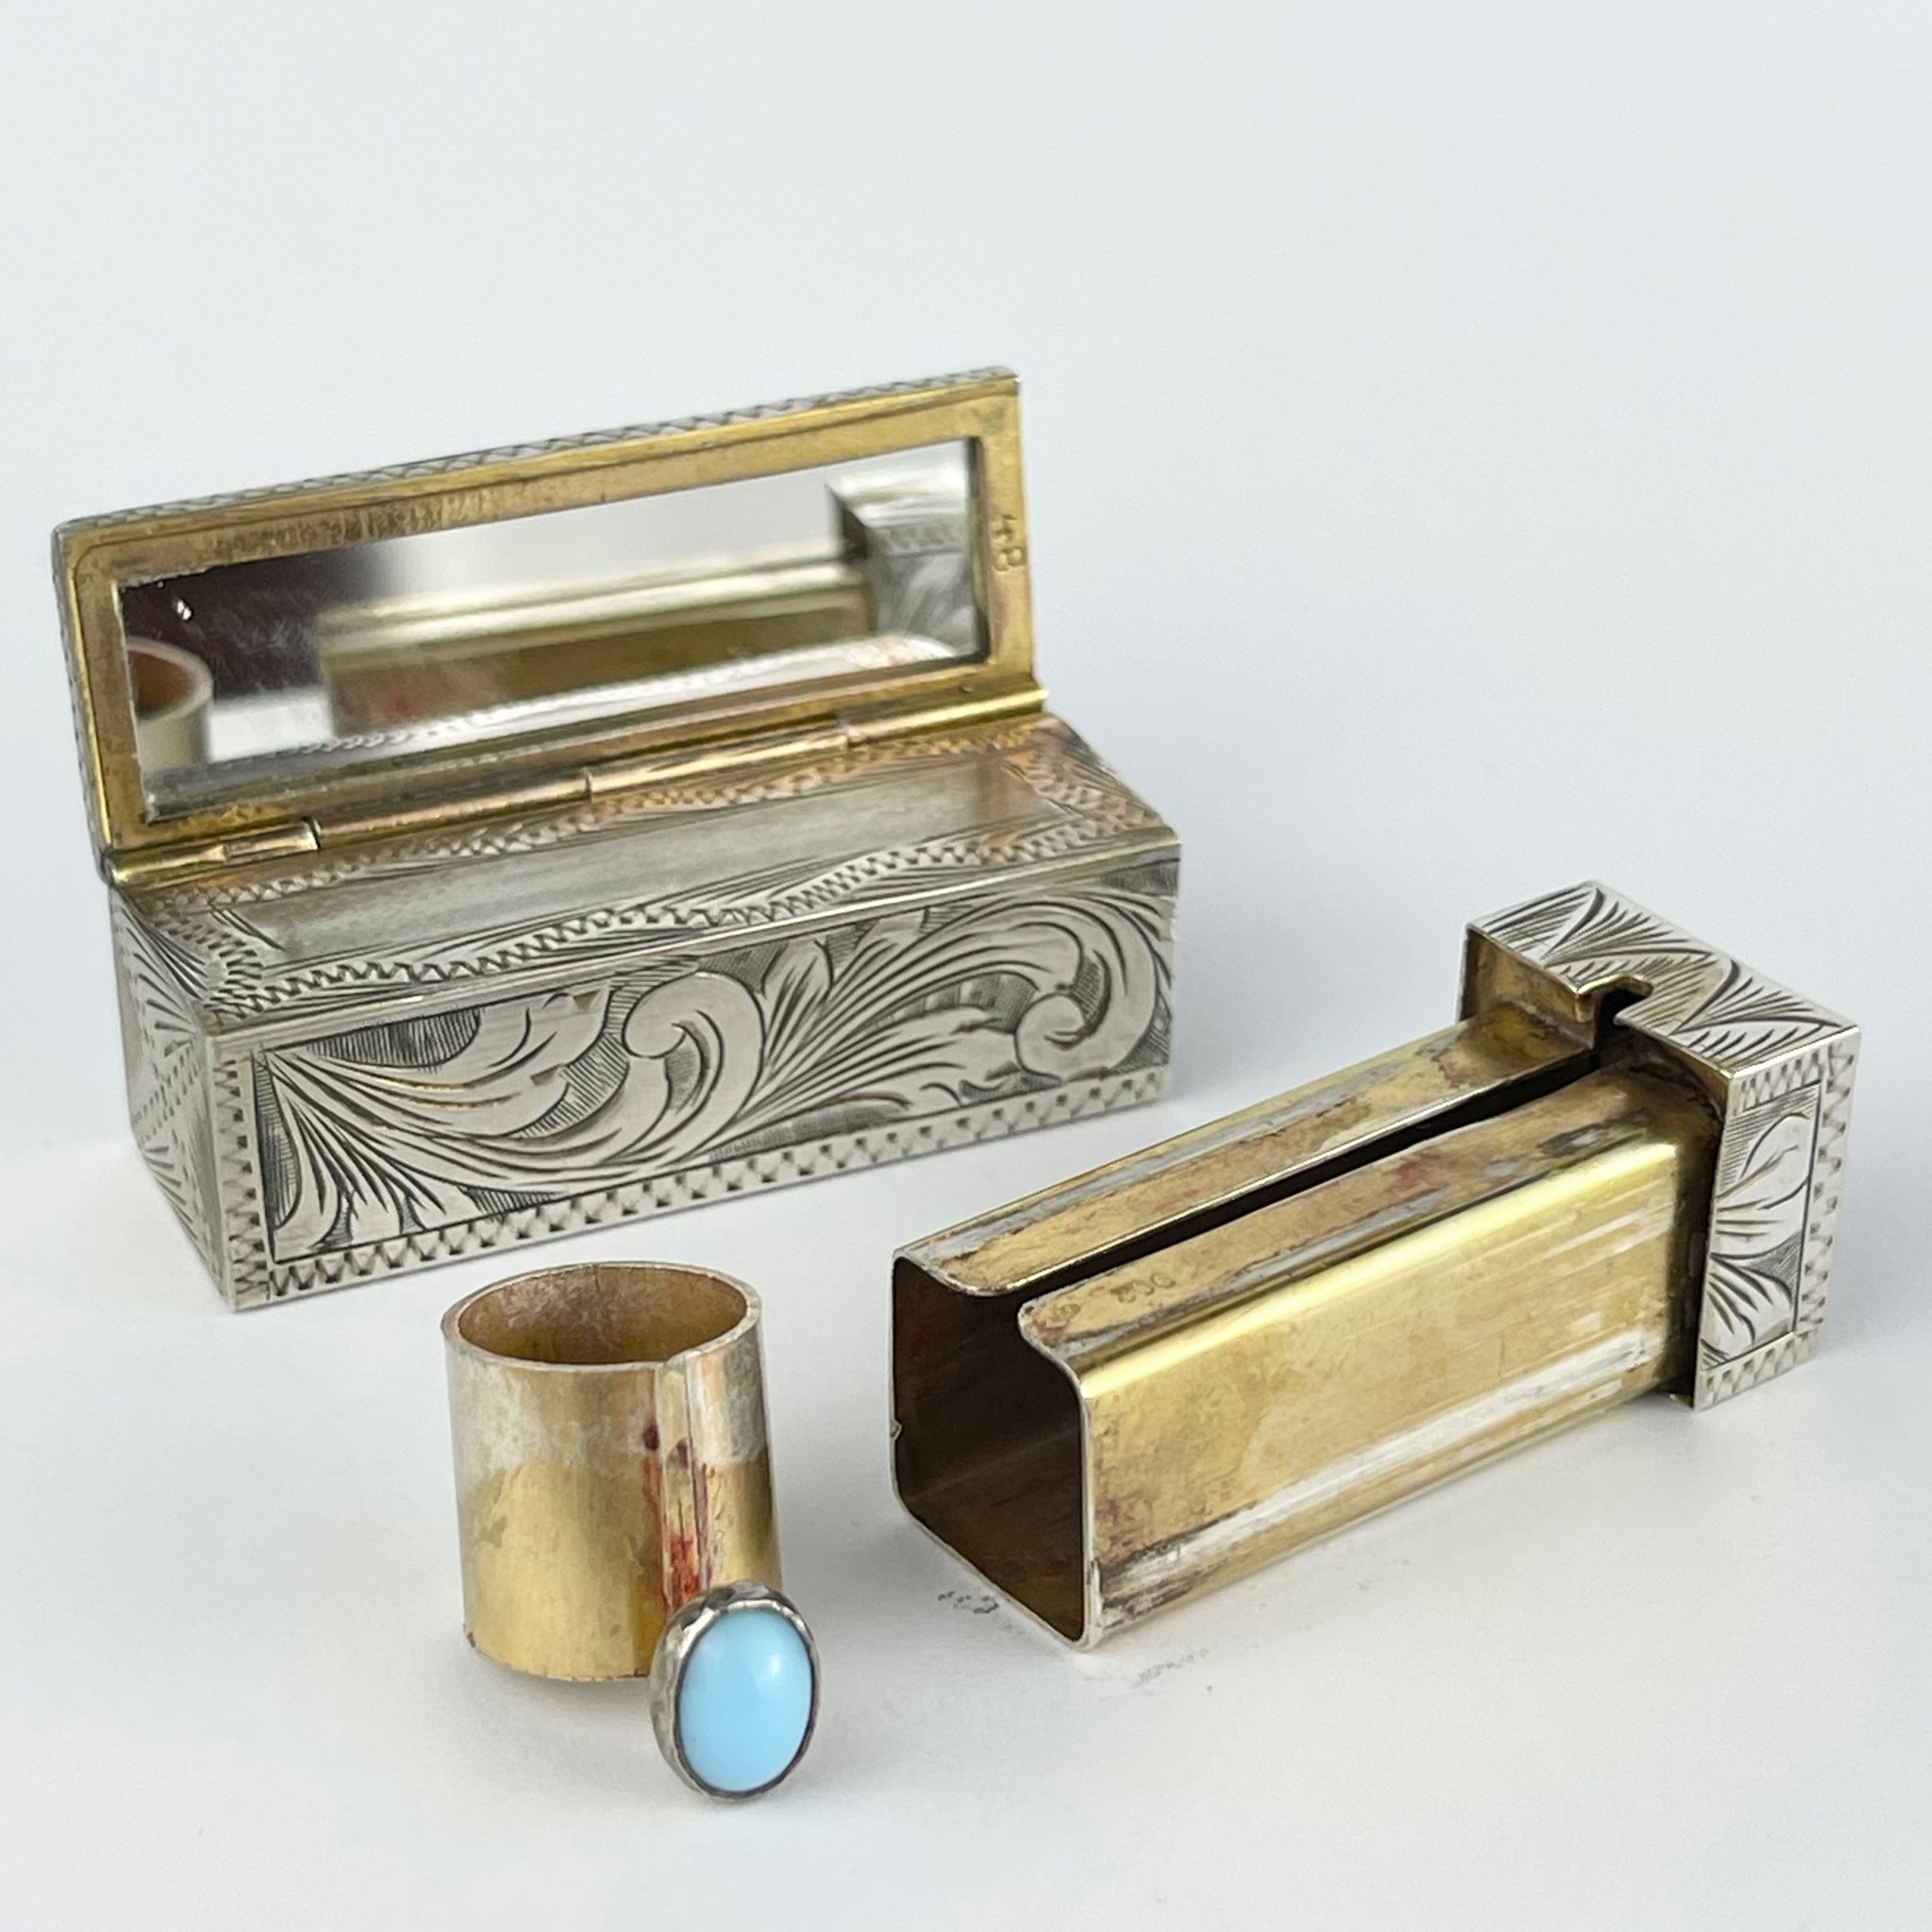 Vintage Engraved Italian Made Silver Lipstick Case with Enamel